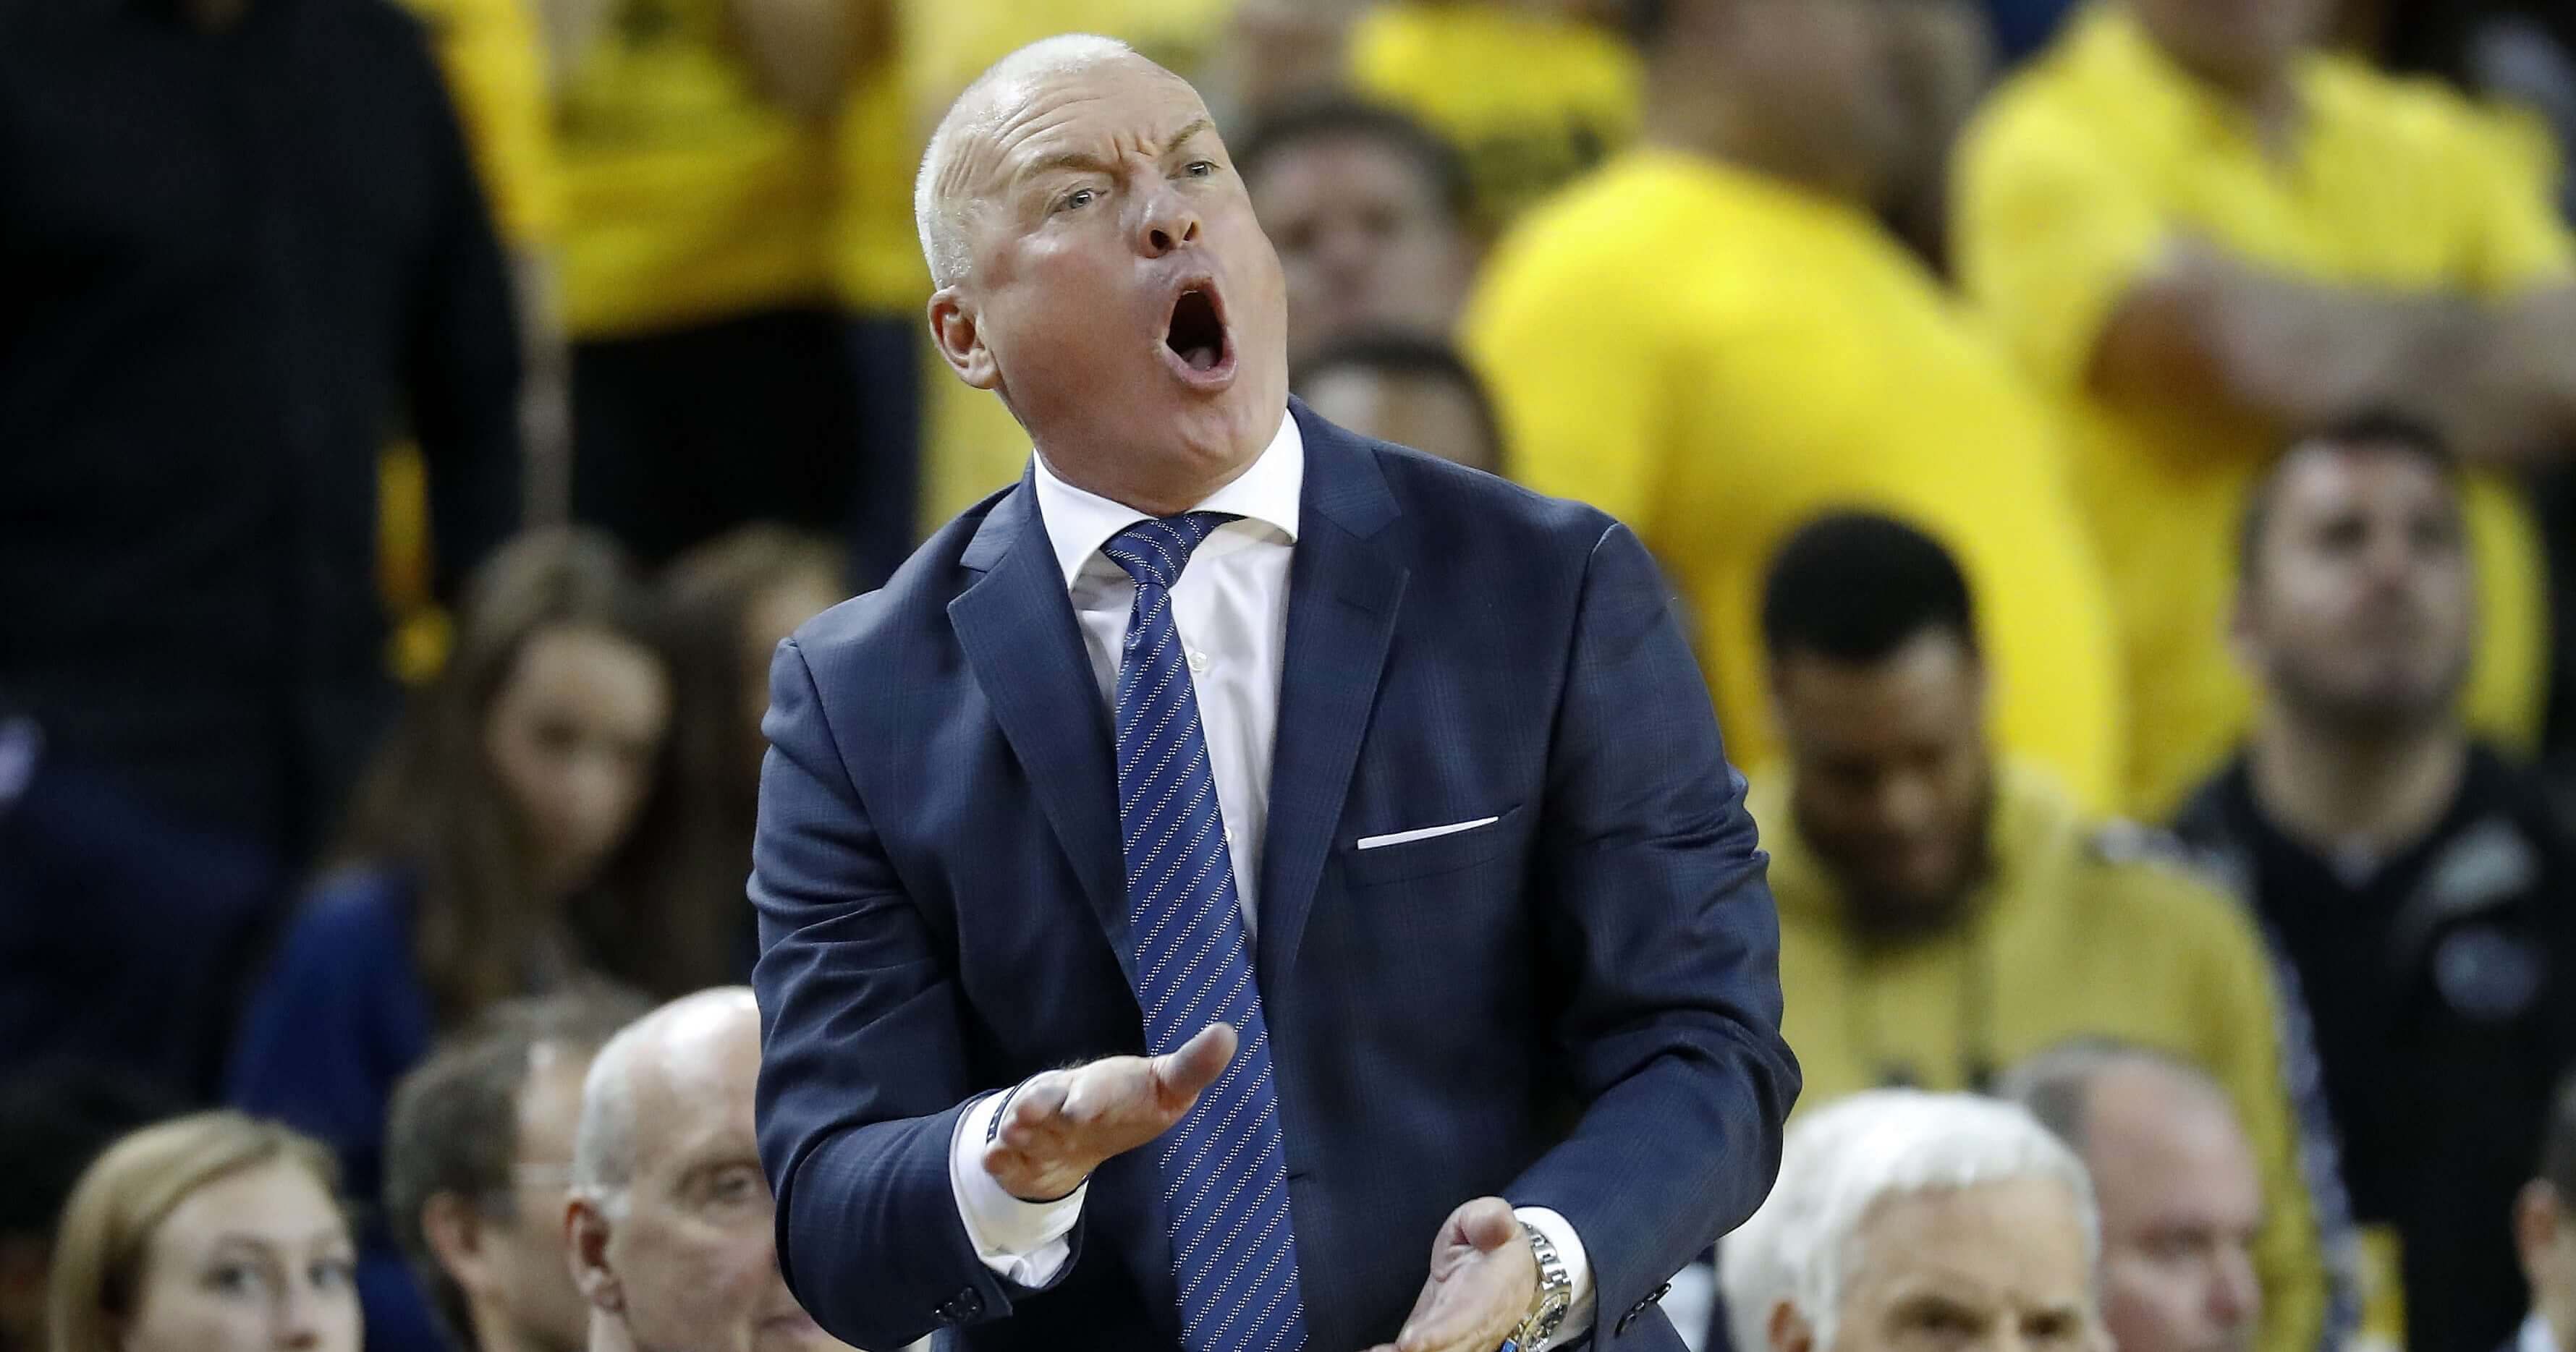 Penn State coach Pat Chambers argues a call in the second half of Thursday's game against Michigan in Ann Arbor.